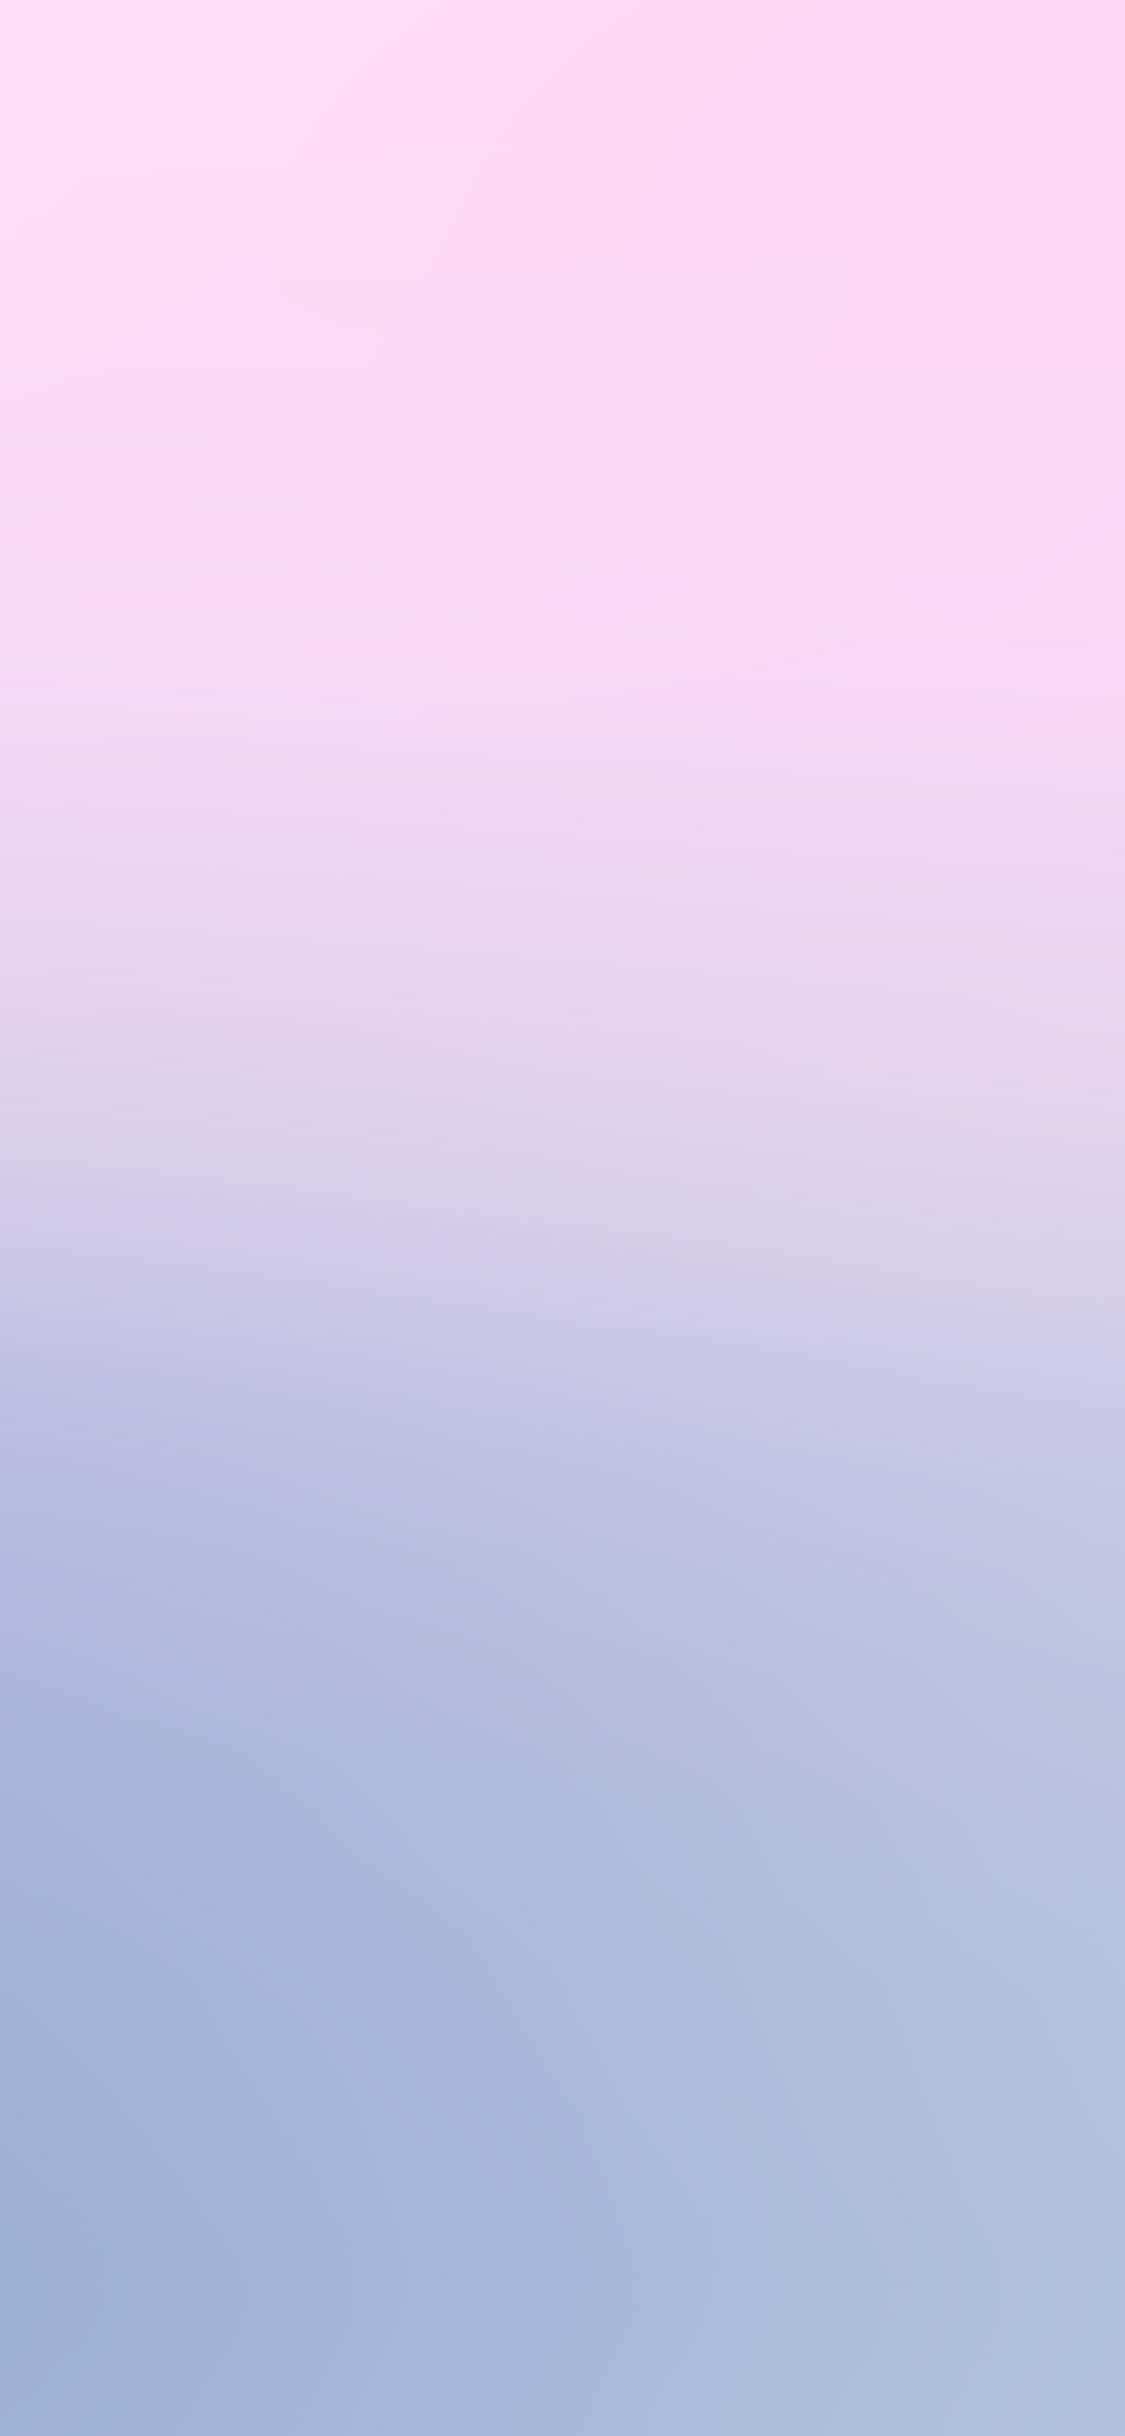 A dreamy, pastel sky filled with purple hues and pink blushes Wallpaper